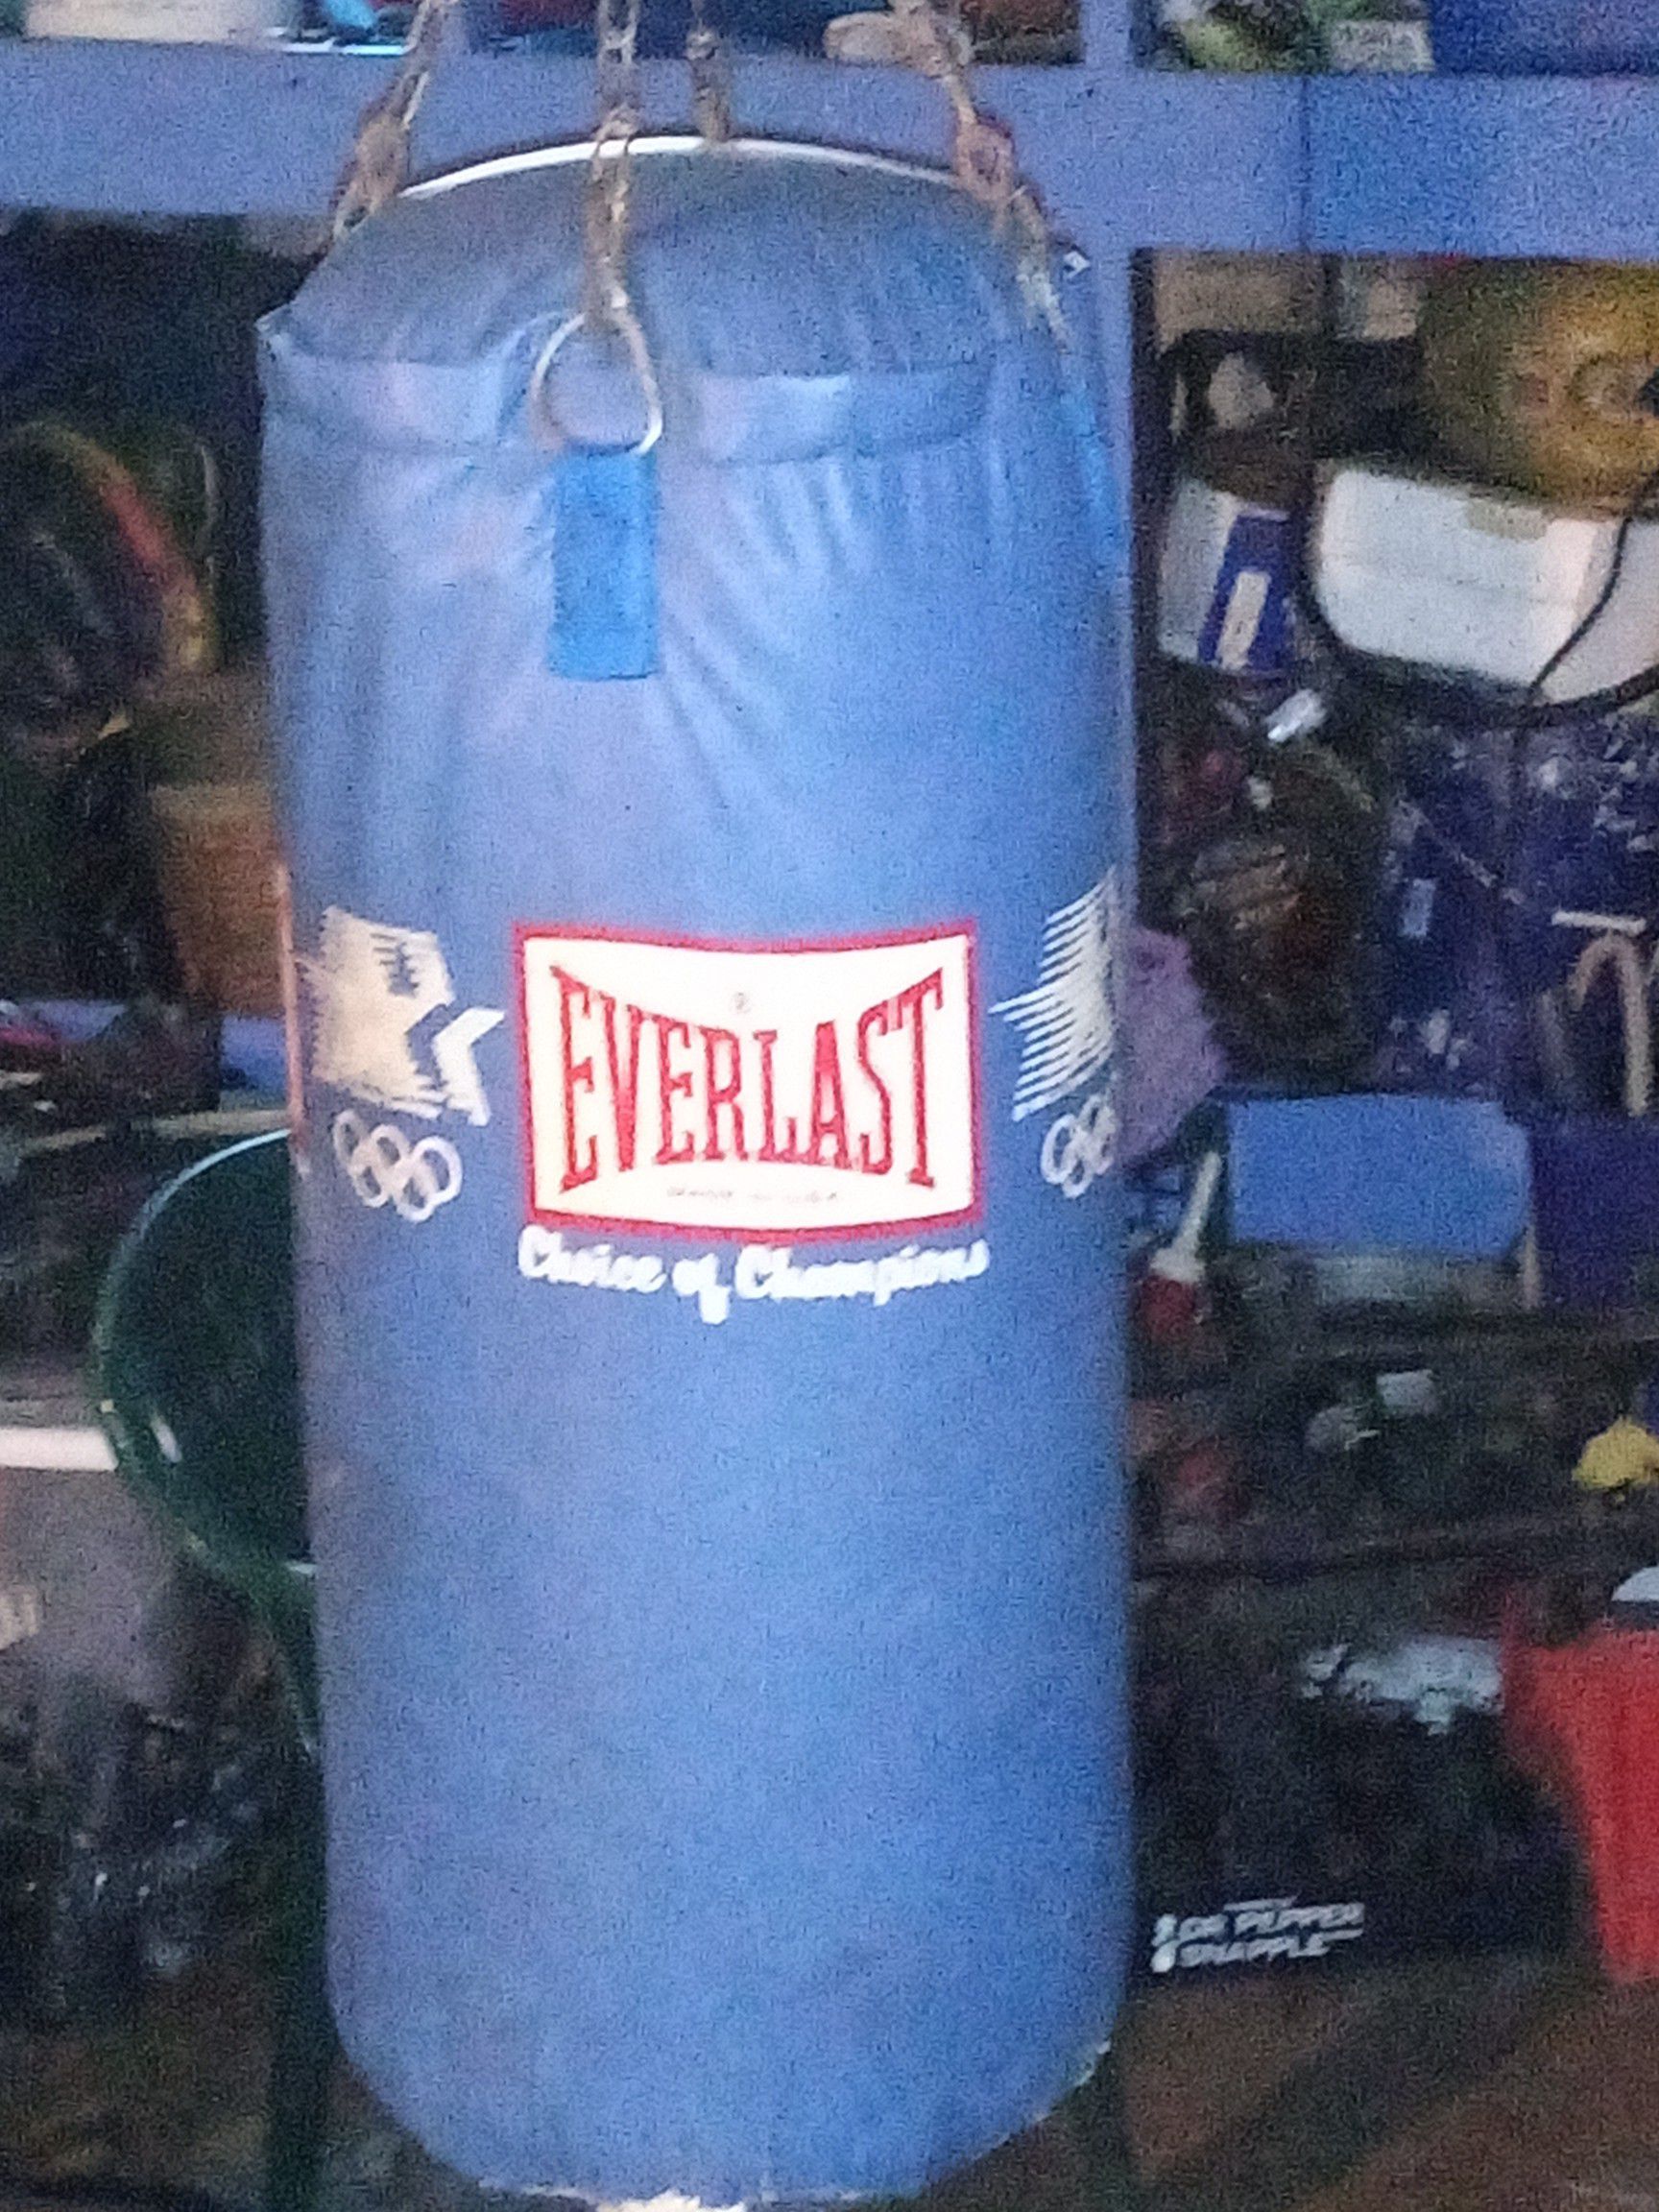 Full size old school punching bag made by Everlast